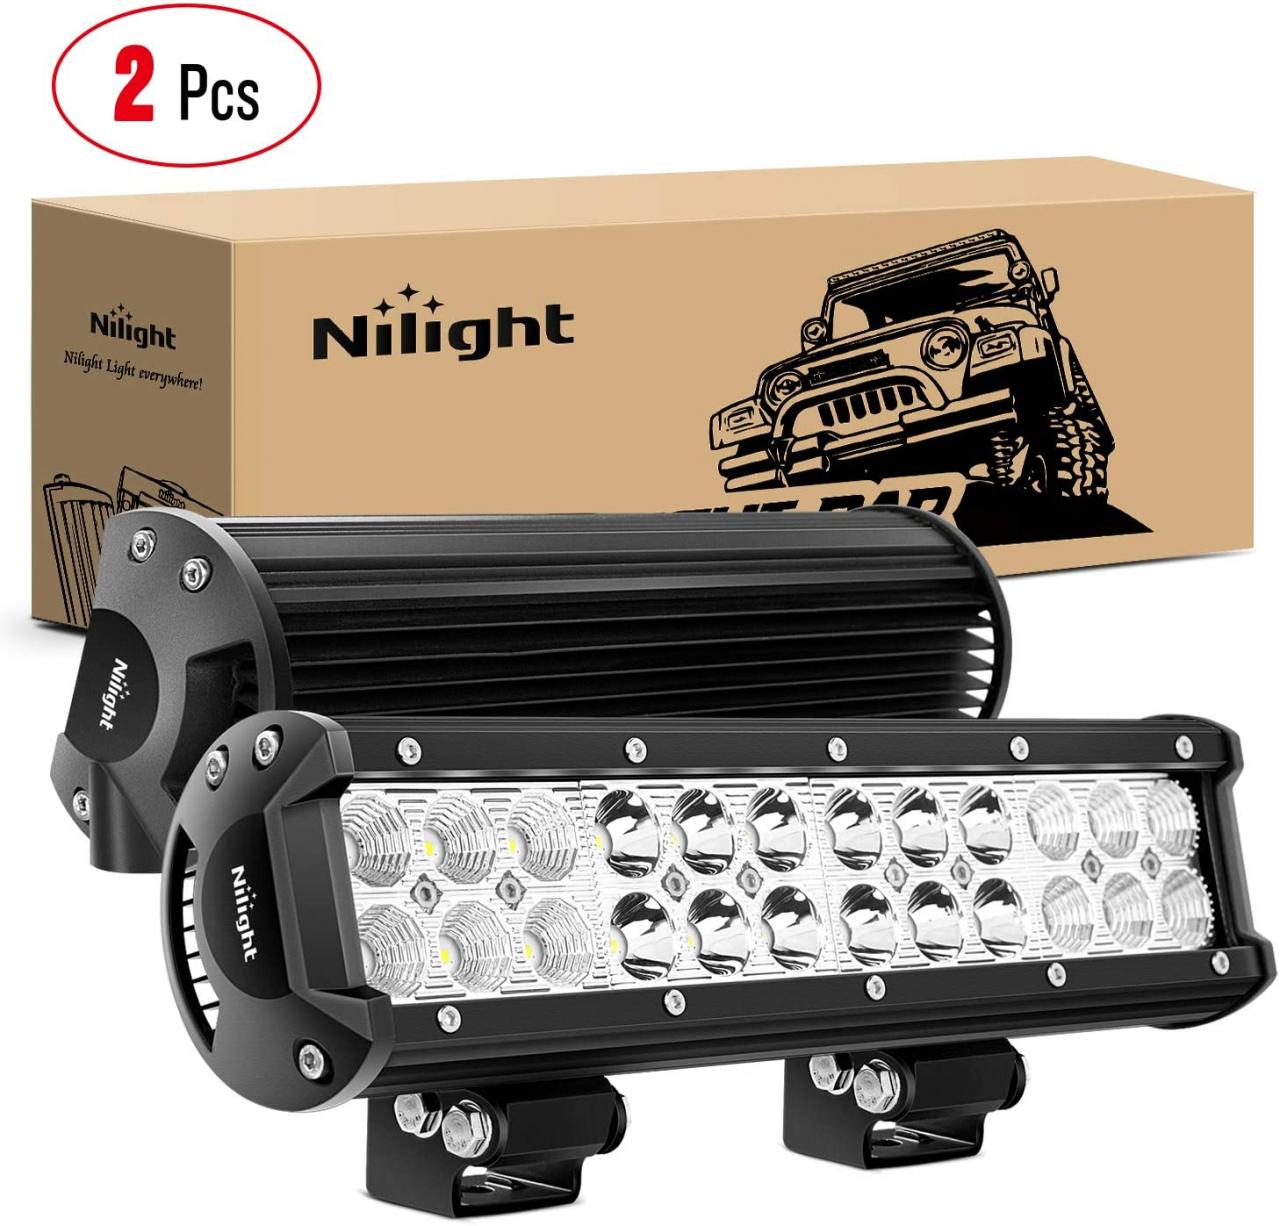 Buy Nilight - 71014C-A 42 240W Spot Flood Combo High Power LED Driving Lamp  LED Light Bar Off Road Fog Driving Work Lights for SUV Boat Jeep Lamp  Online in Vietnam. B01MY1W7AO